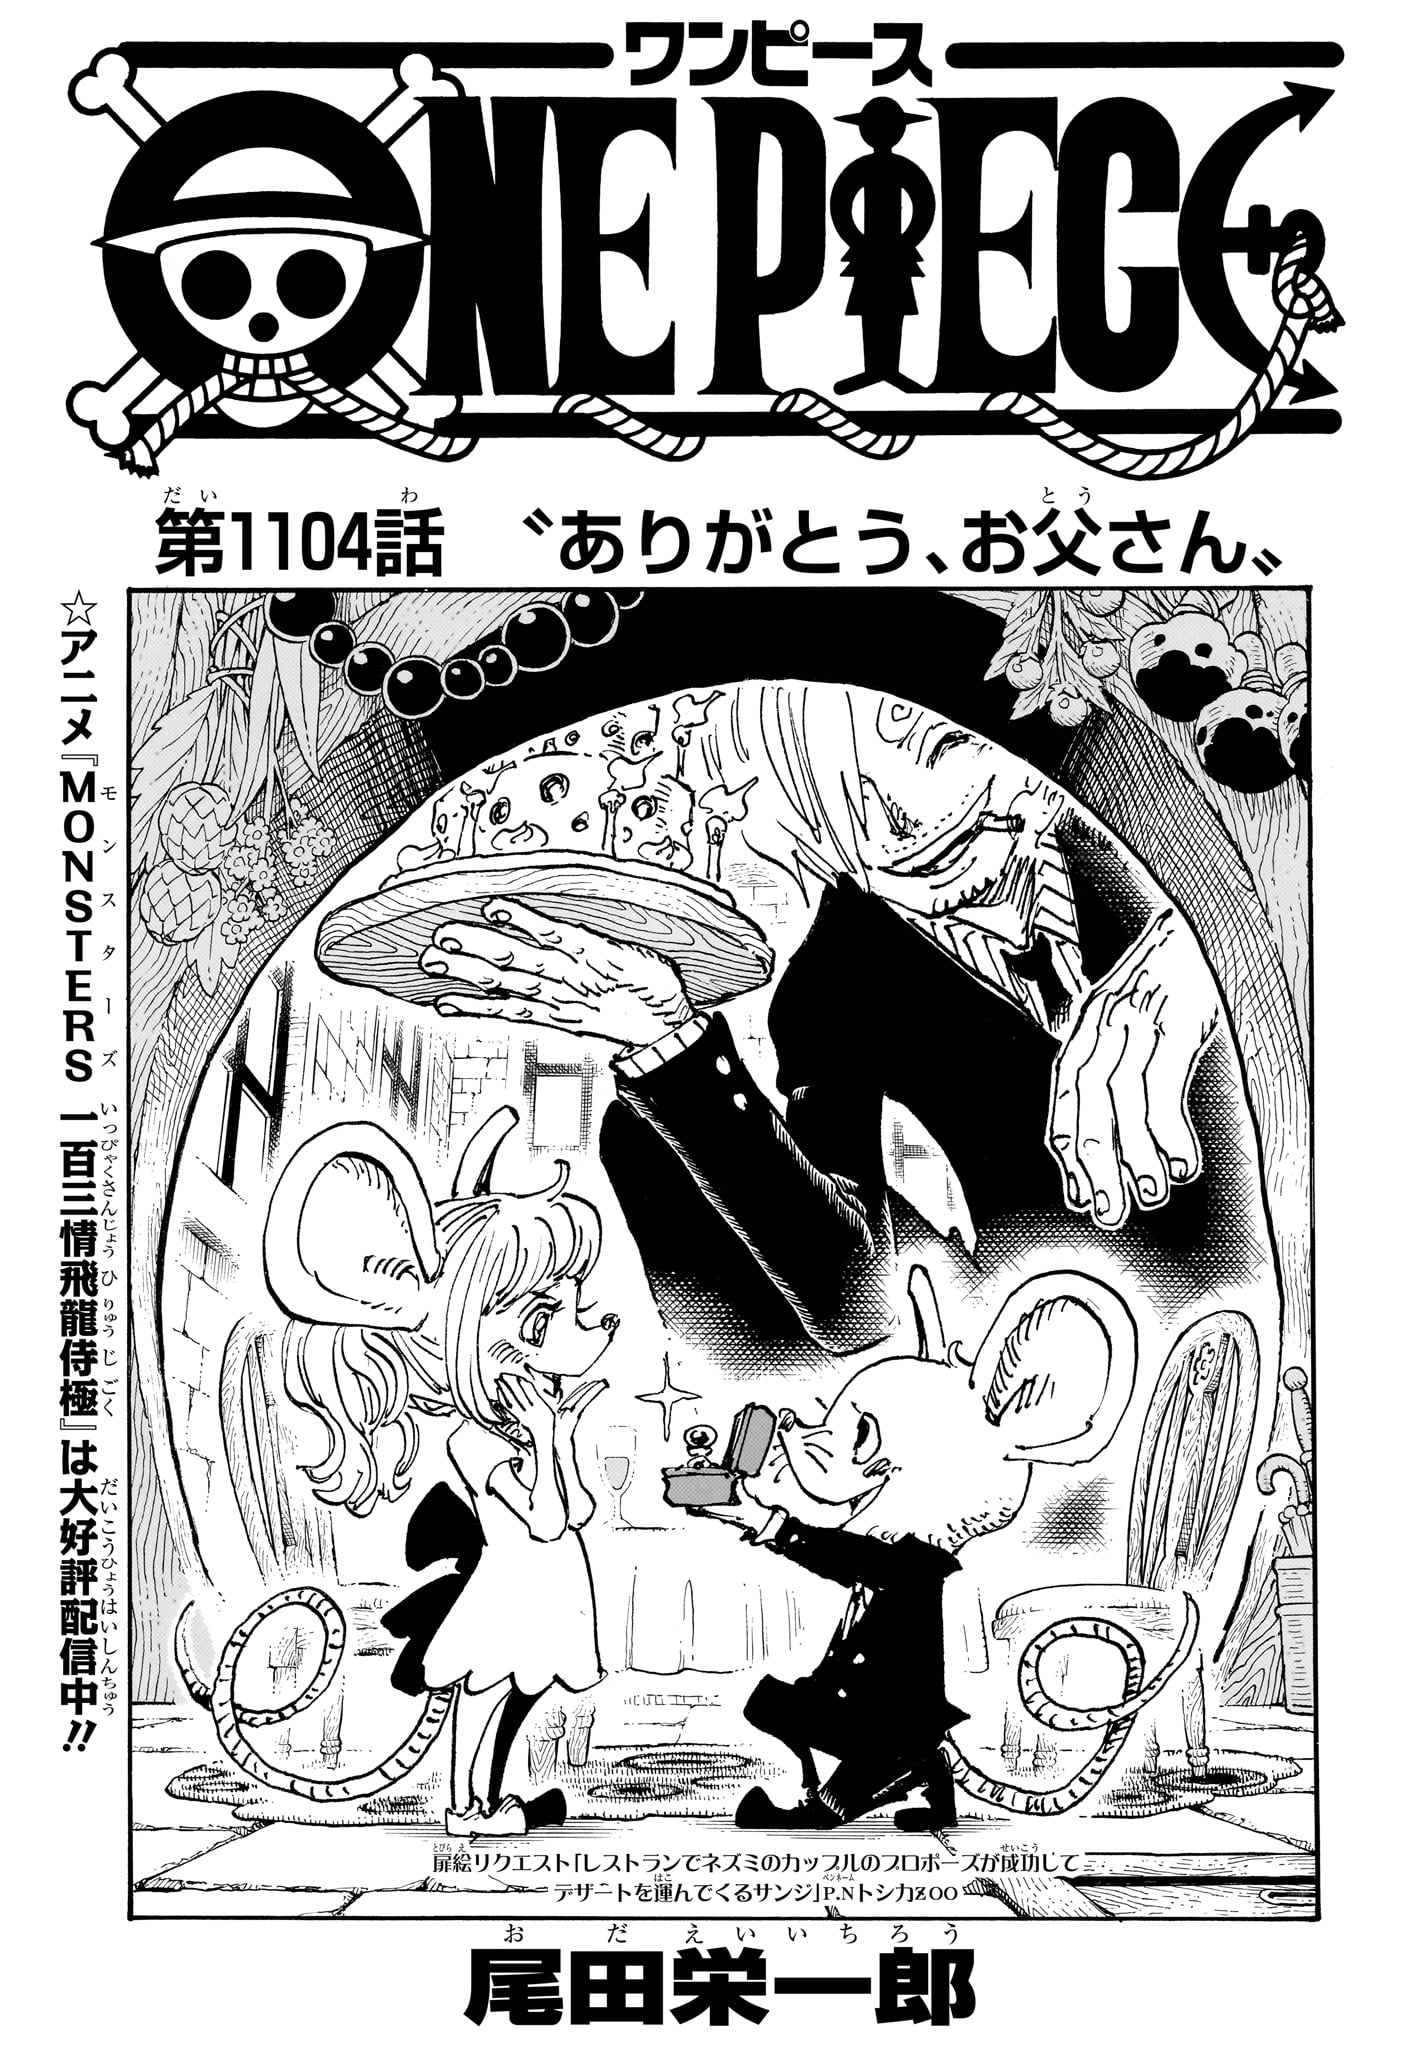 One Piece - Chapter 1104 - Page 1